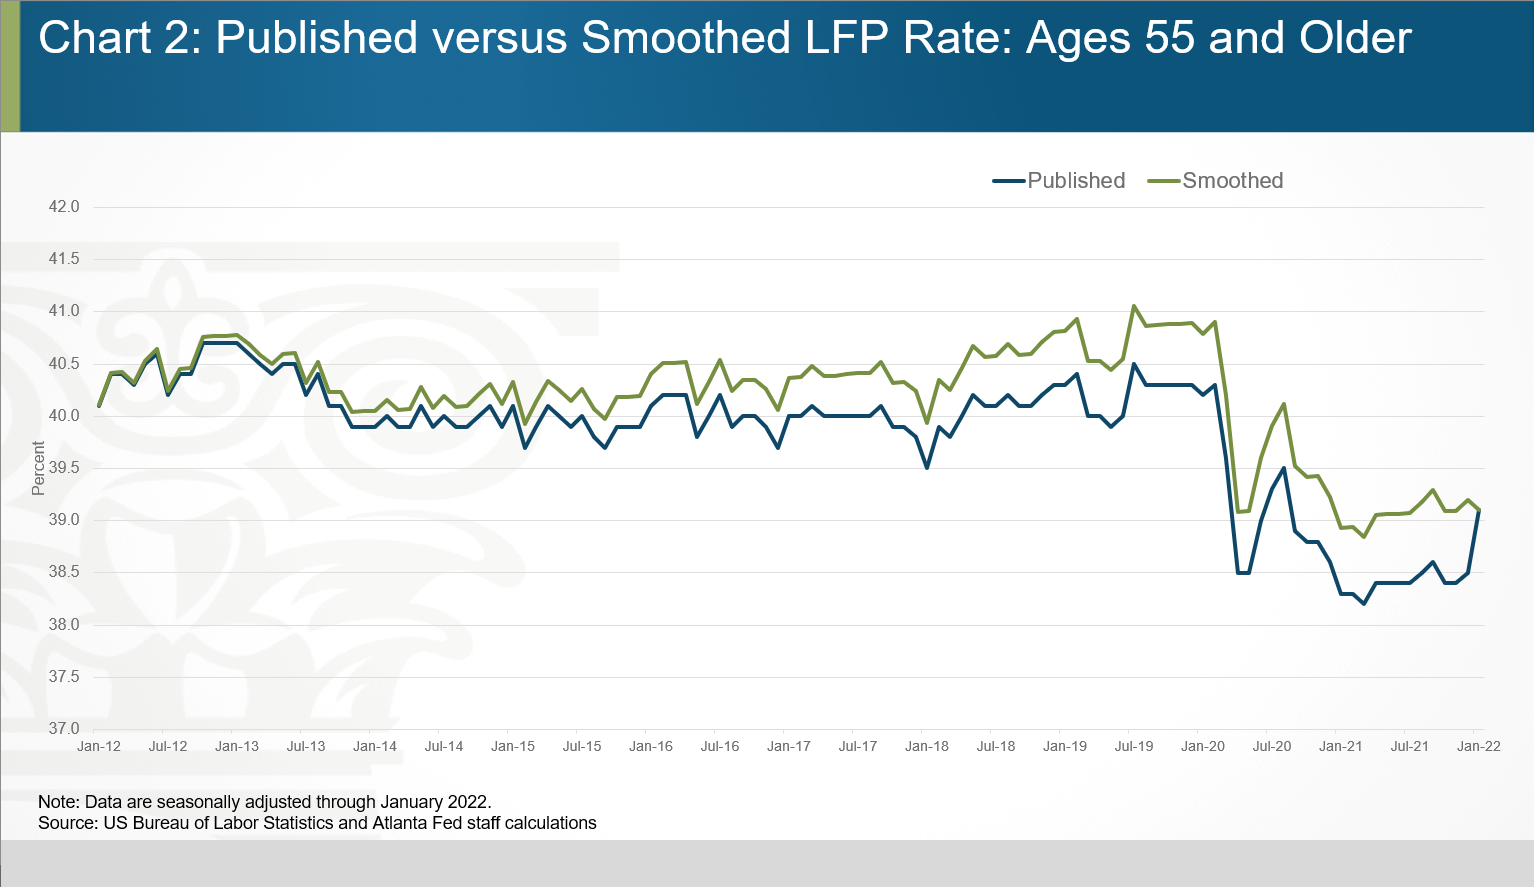 Chart 02 of 06: Published versus Smoothed LFP Rate: Ages 55 and Older